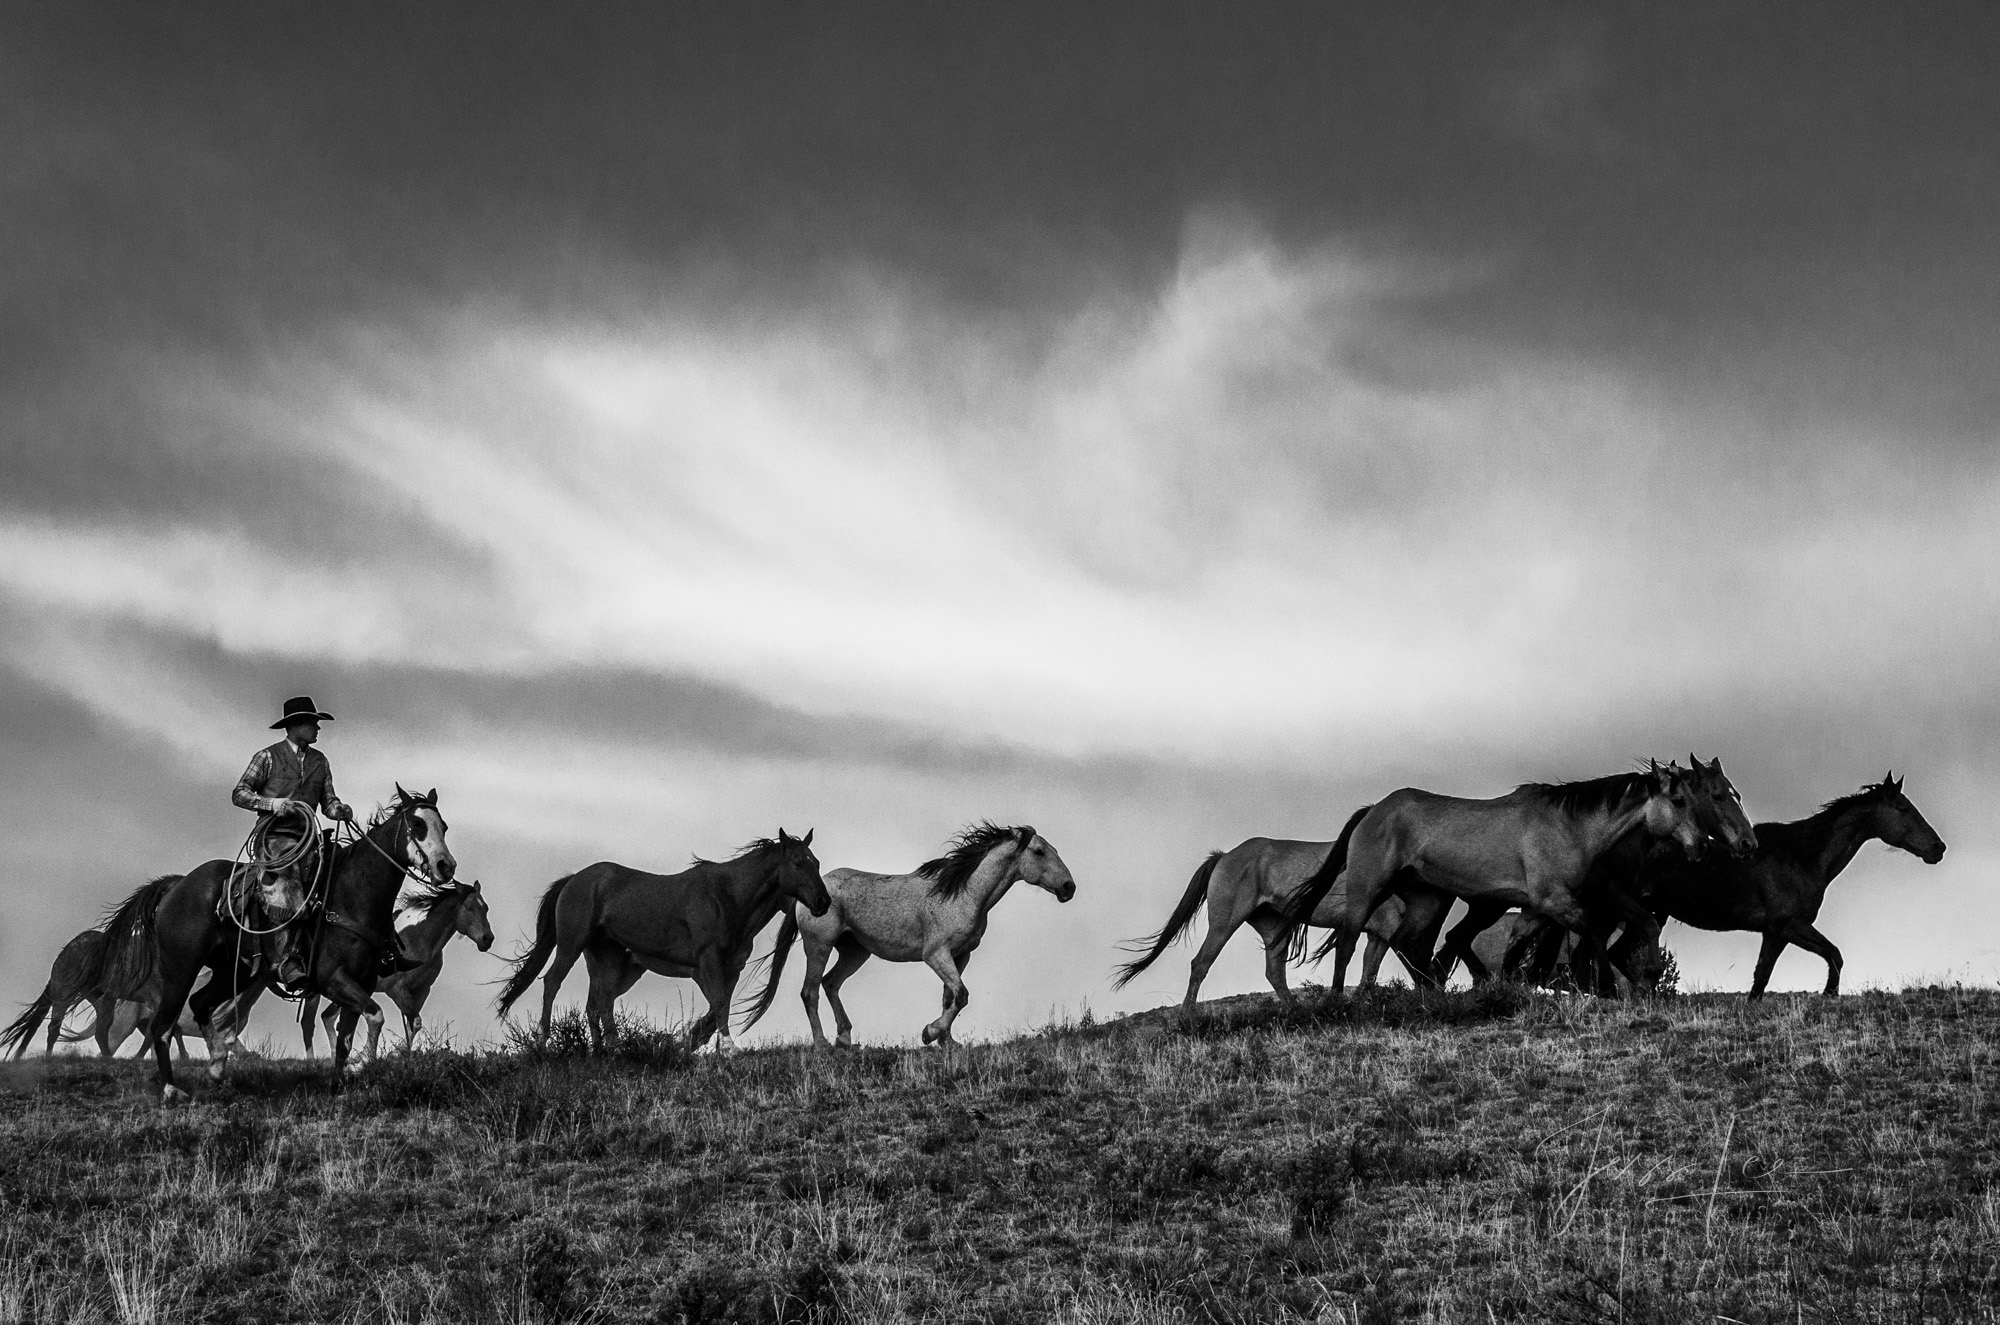 Fine Art Limited Edition Photo Prints of Cowboys, Horses, and life in the West. Ridge Runners. A Cowboy picture in black and...